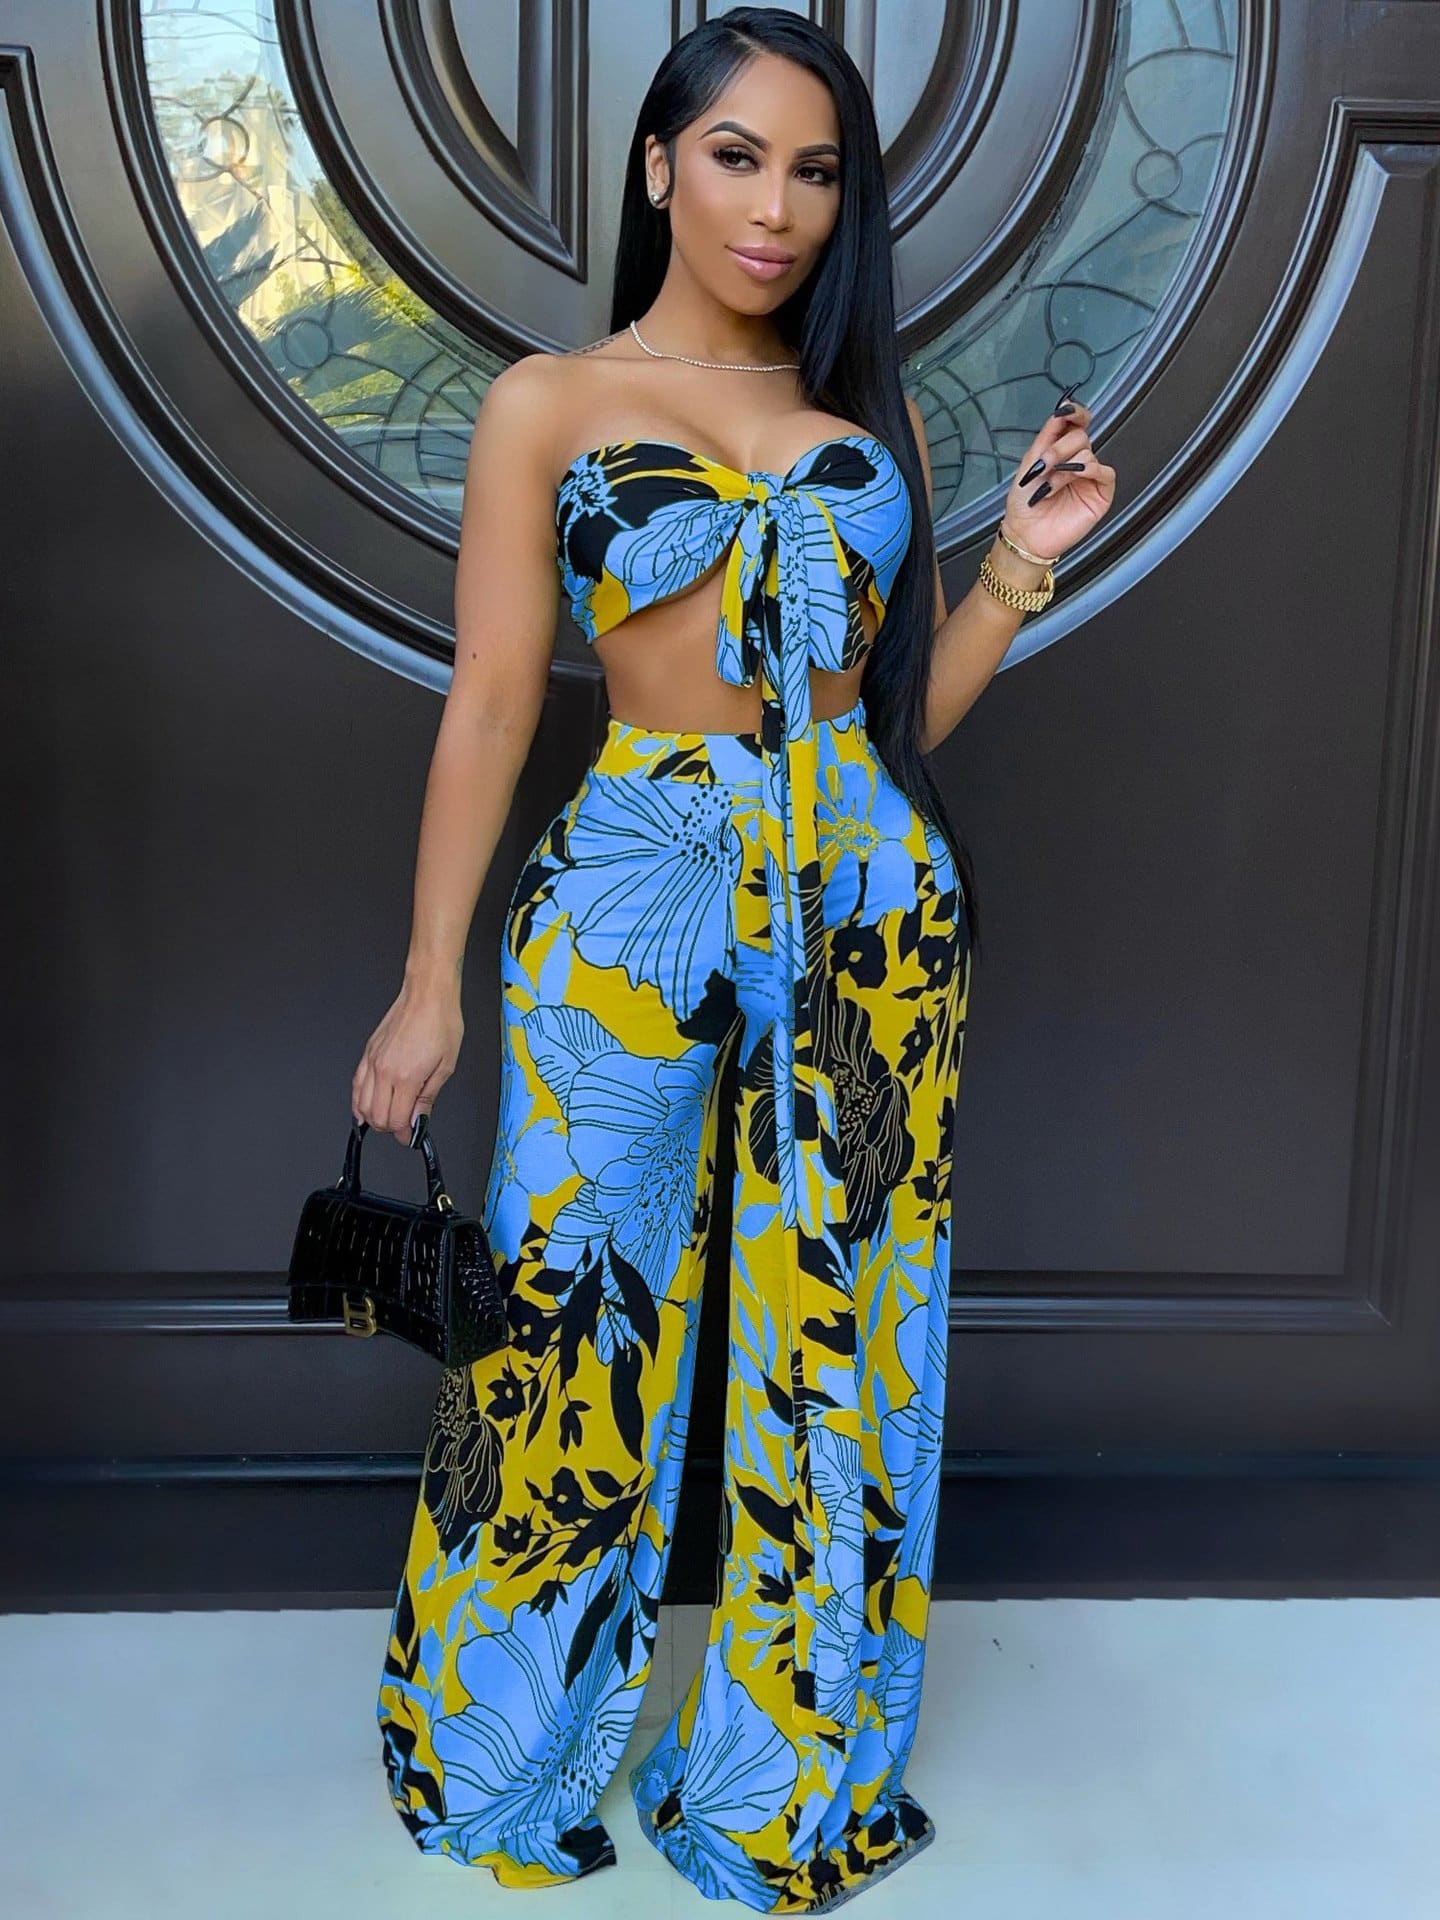 peopleterritory Fashion Printed Strapless Top And Long Pants Set